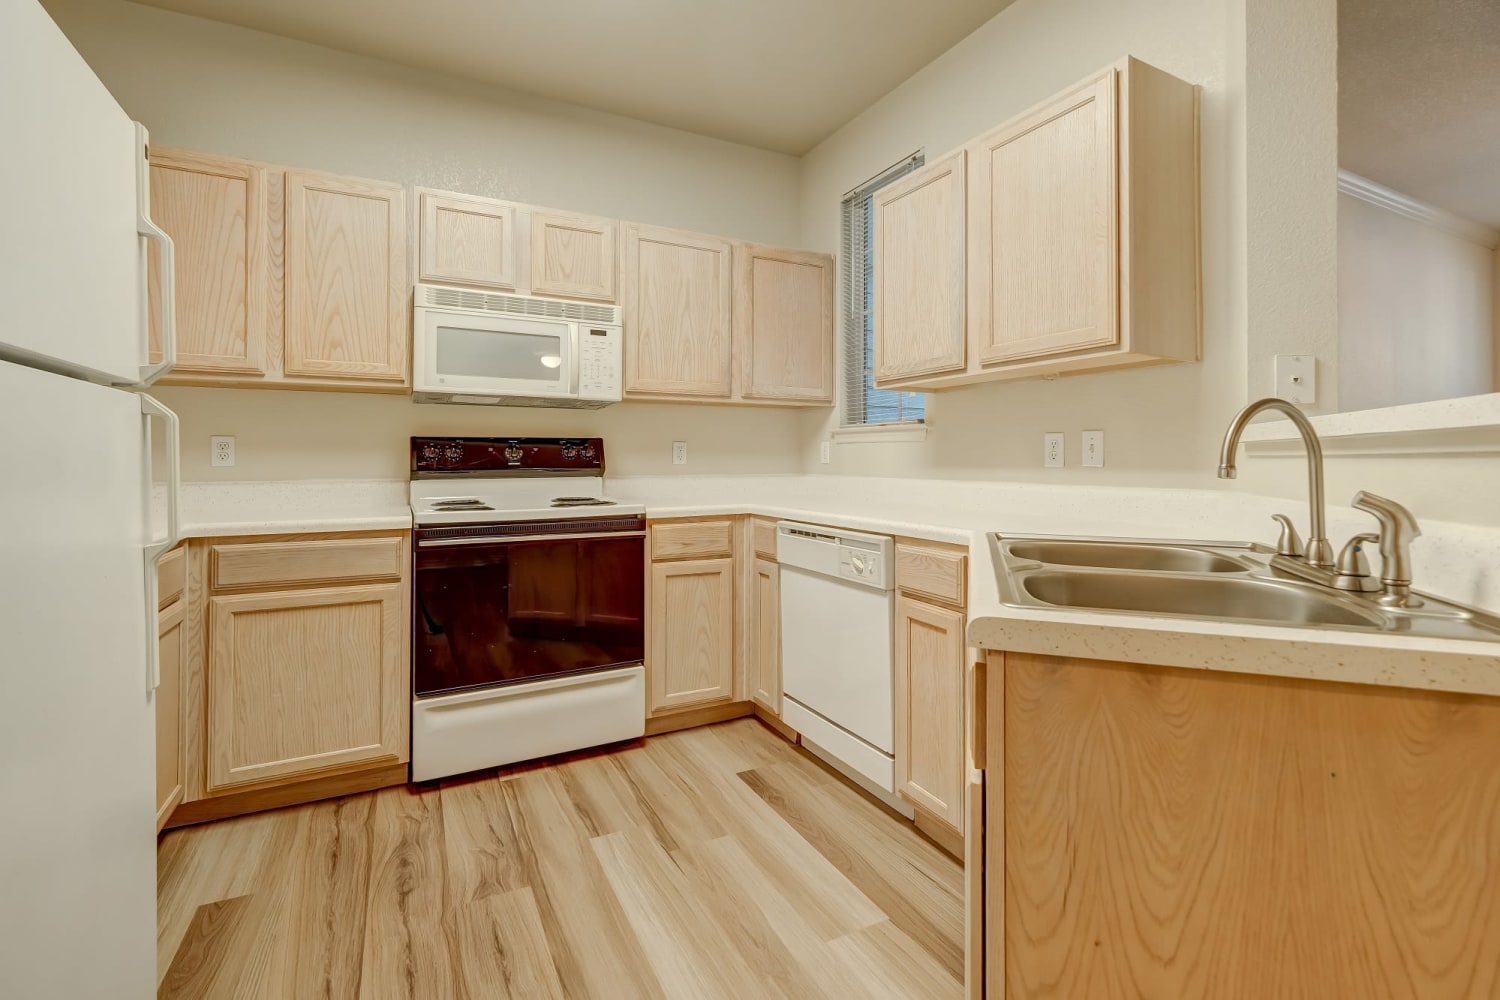 Kitchen with wood cabinets at Audubon Lake Apartment Homes in Lafayette, Louisiana